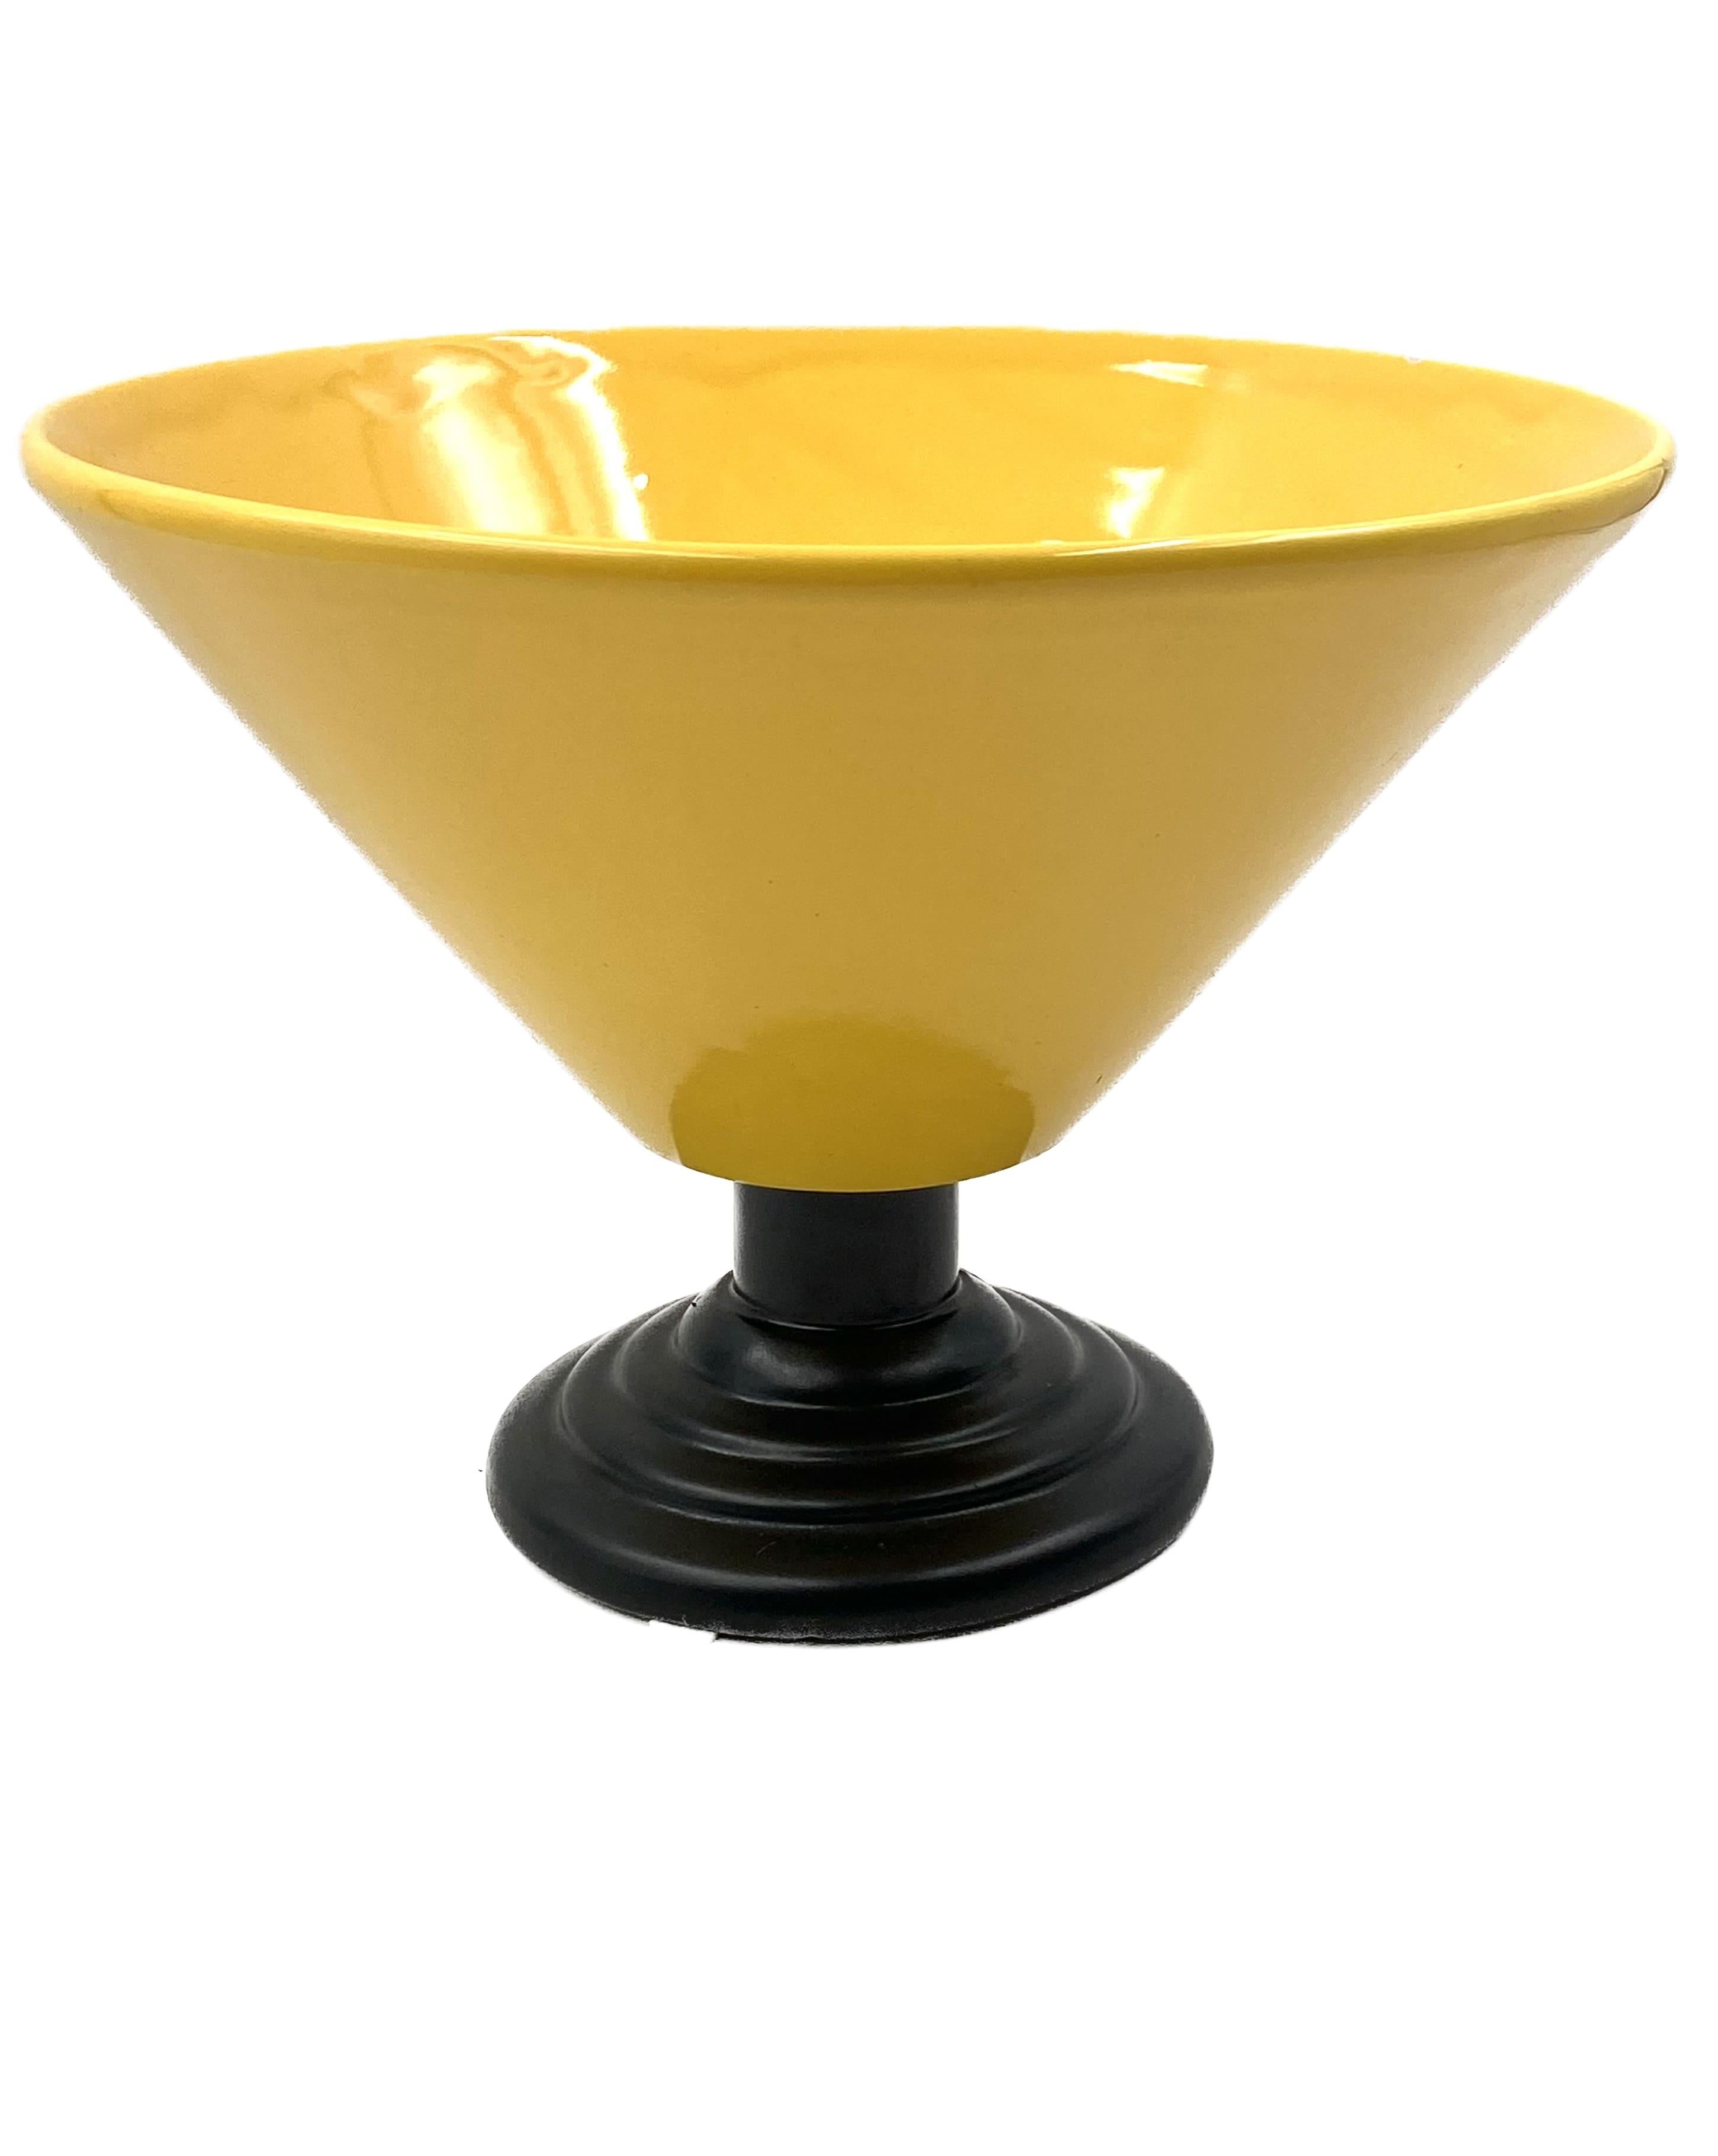 Late 20th Century Yellow Conic Vase, Postmodern Memphis Milan Style, Italy 1980s For Sale